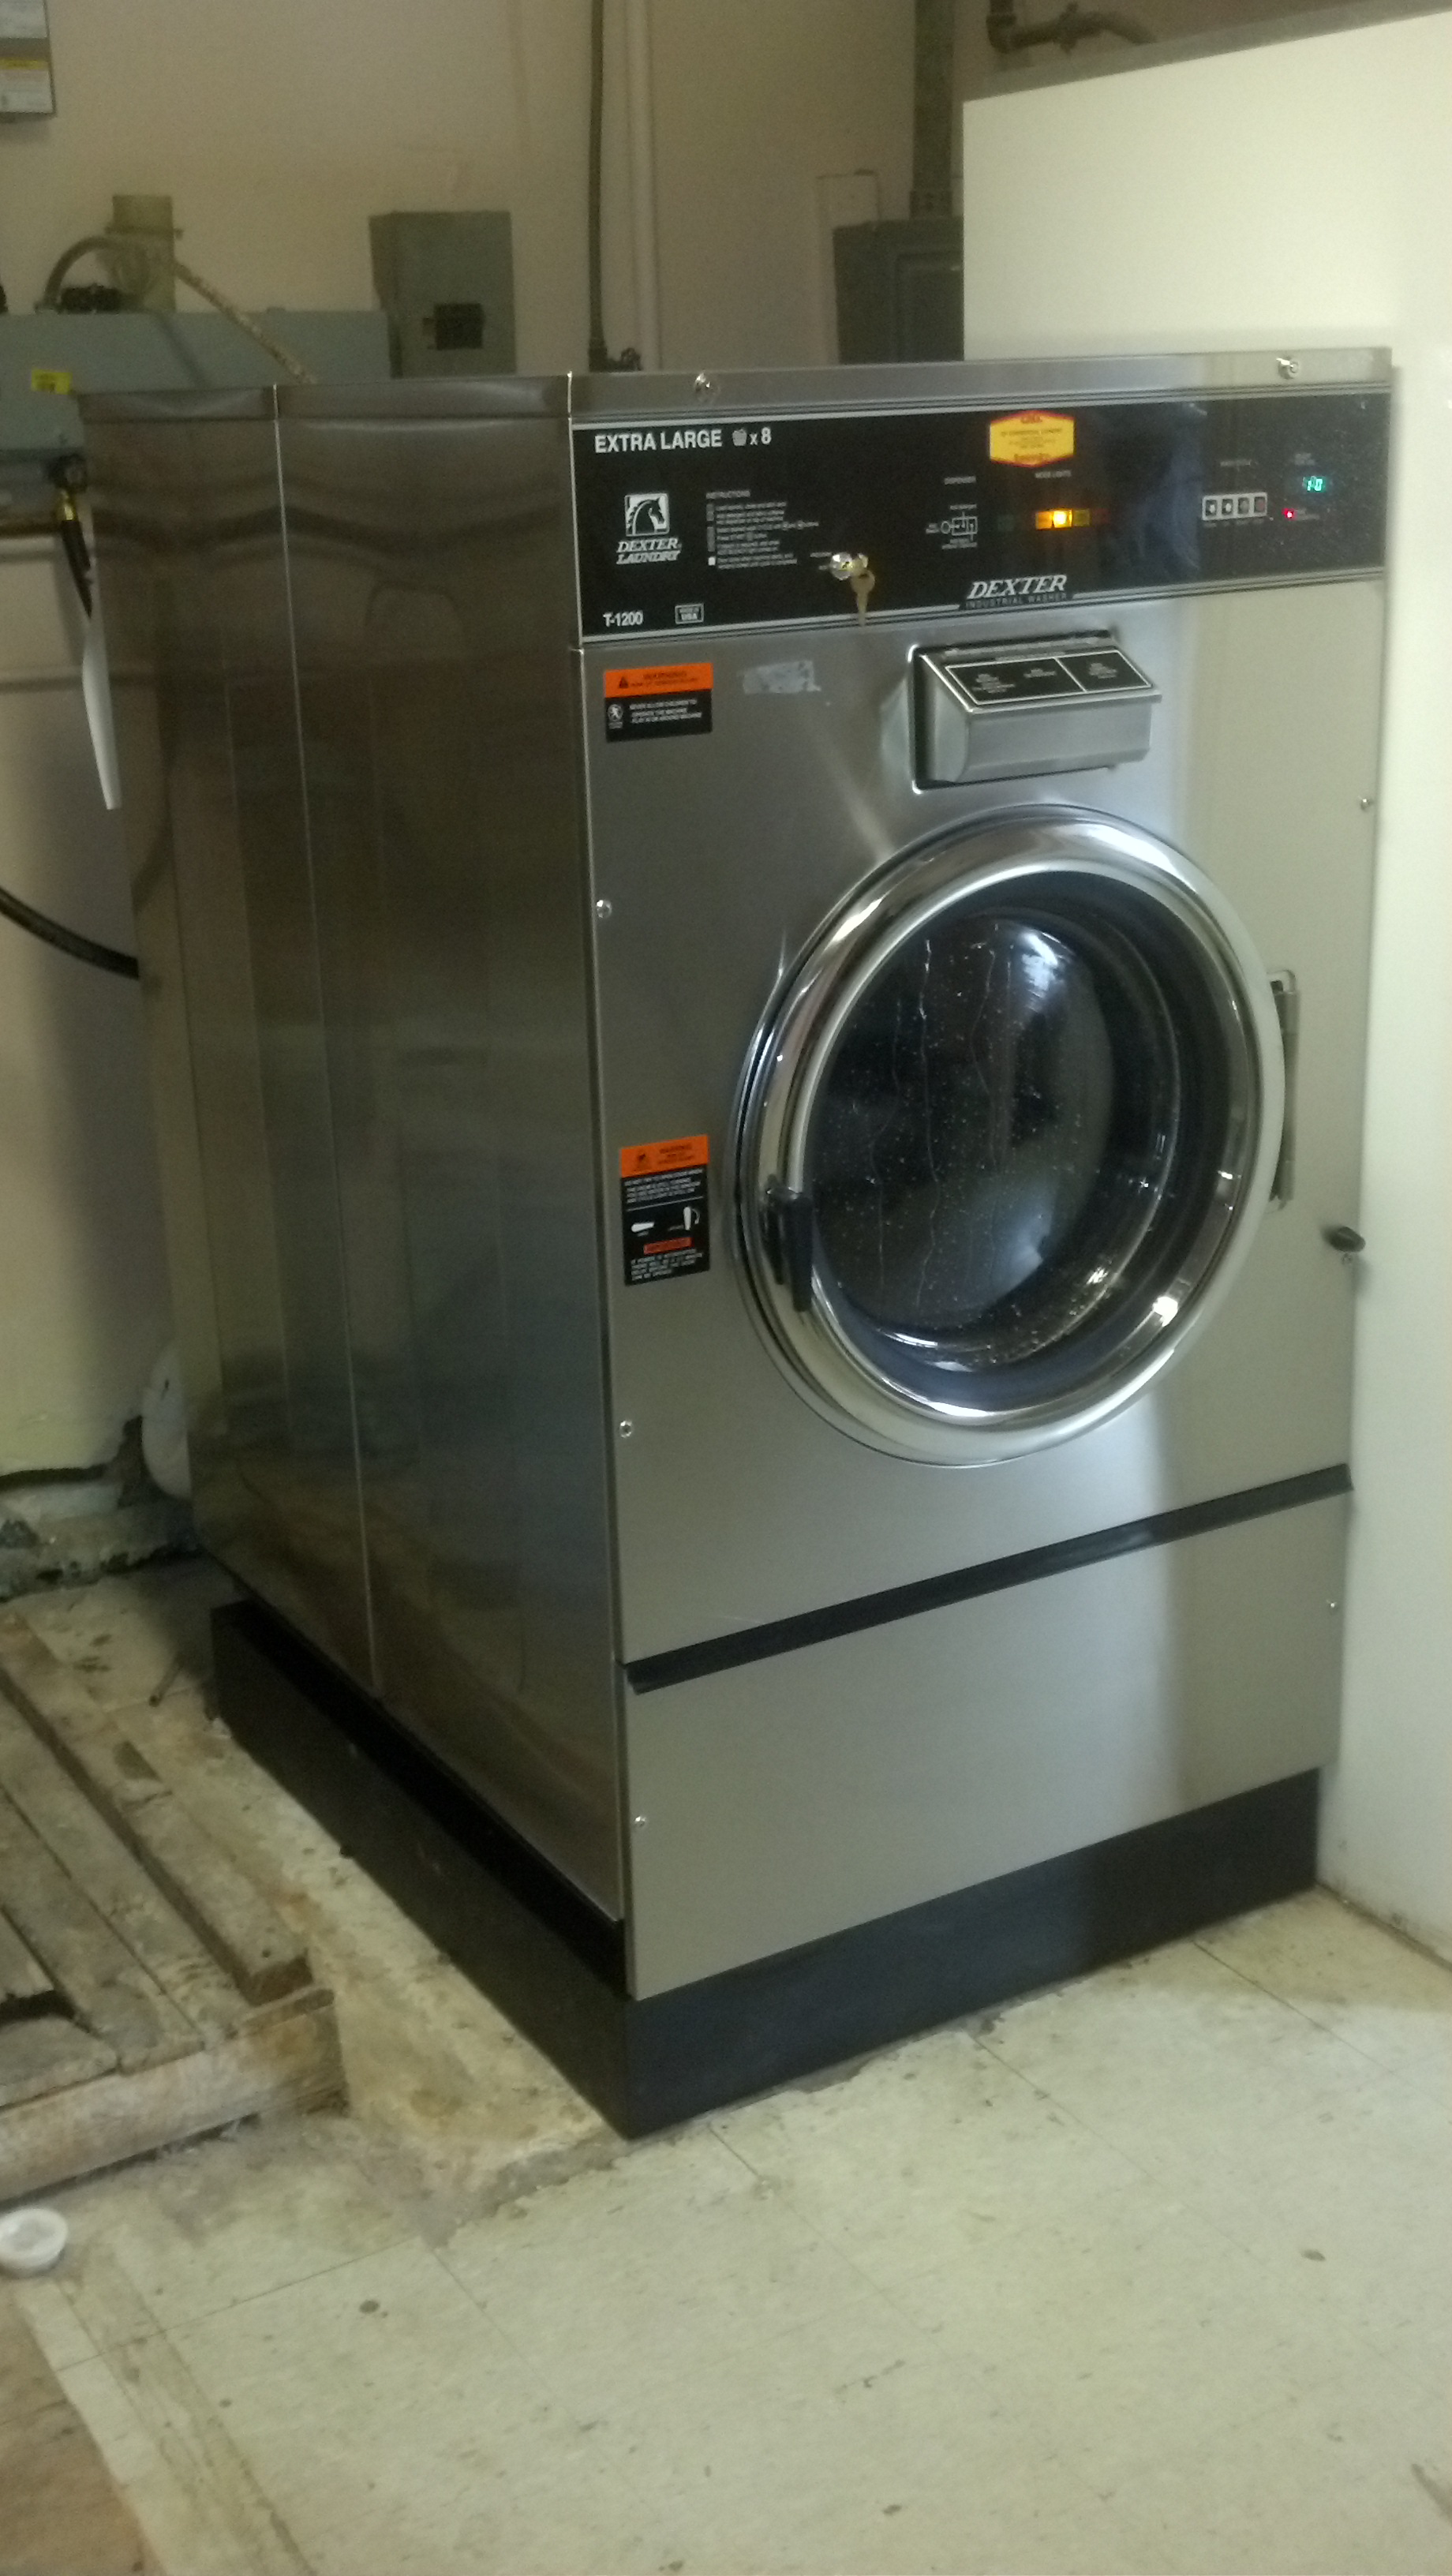 Dexter Laundry Washer And Dryer Supplier In Austin TX